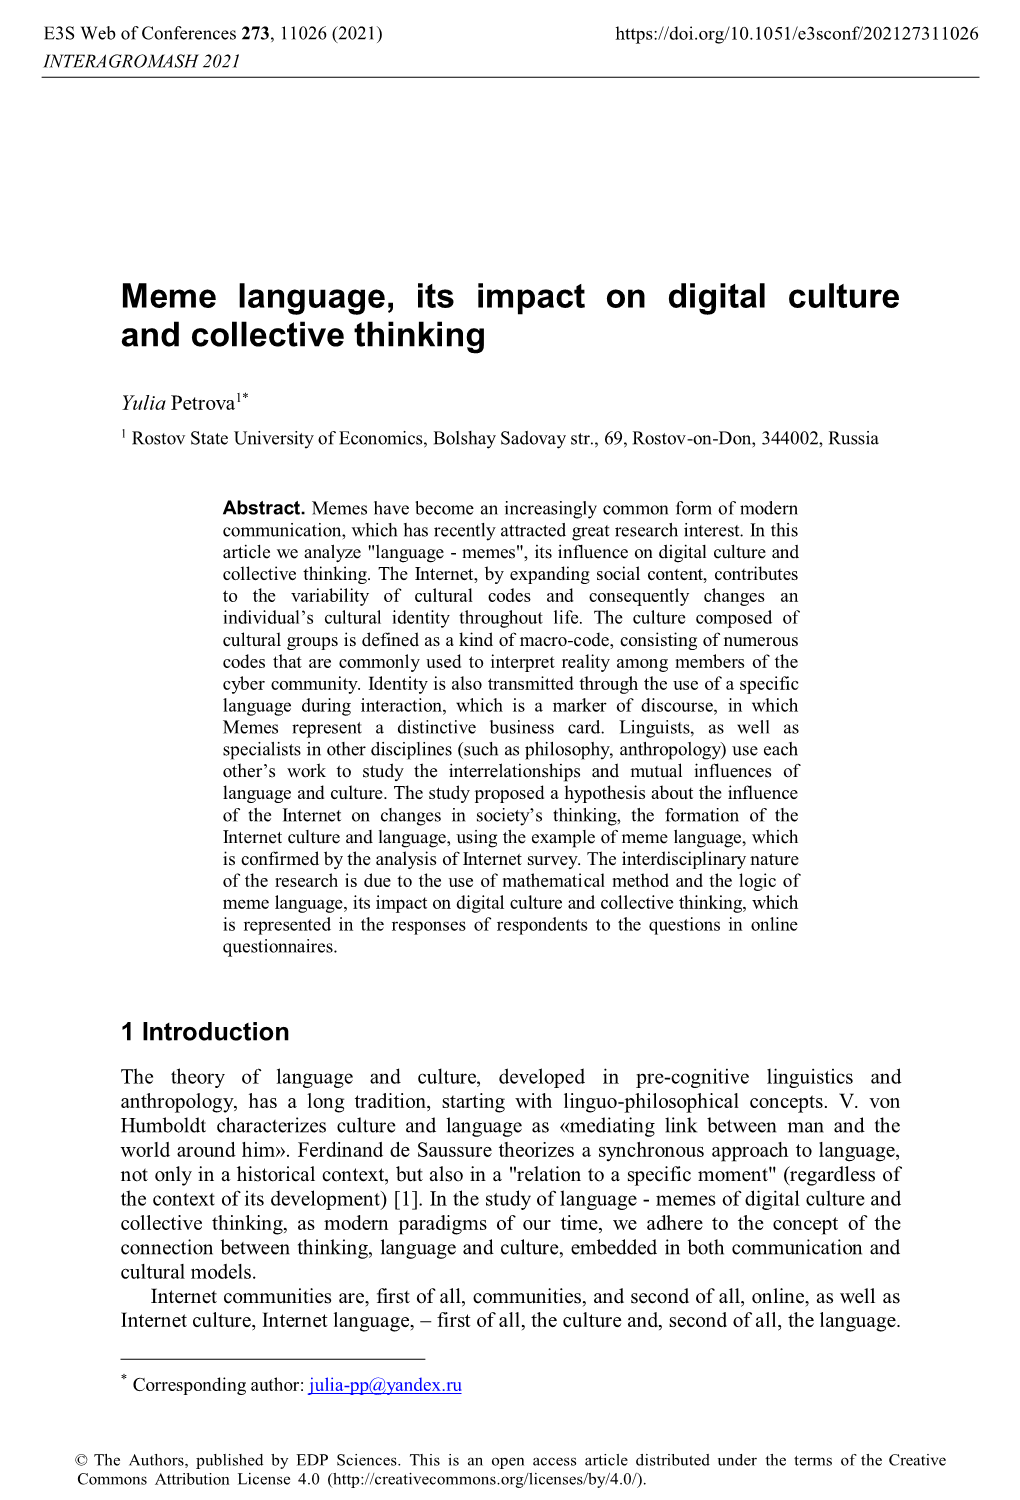 Meme Language, Its Impact on Digital Culture and Collective Thinking